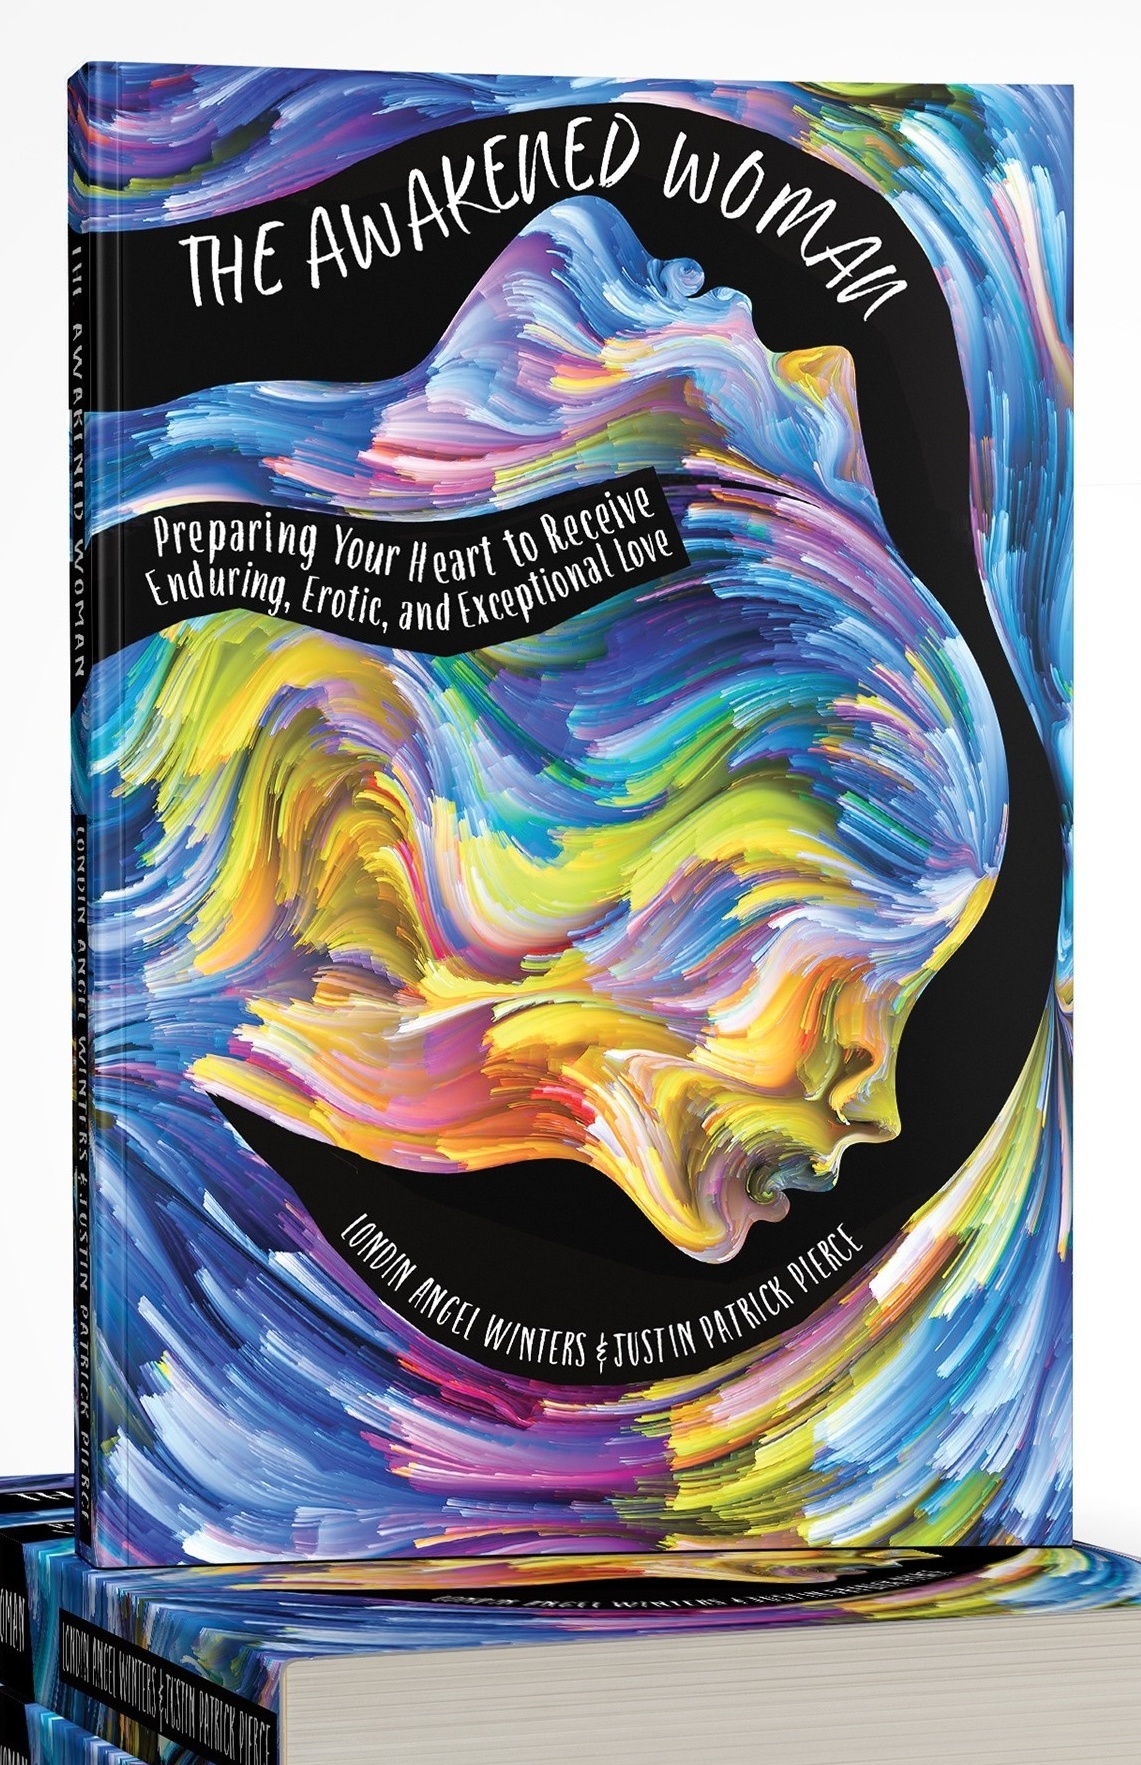 book cover design trends: abstract illustration of a person in paint-like style